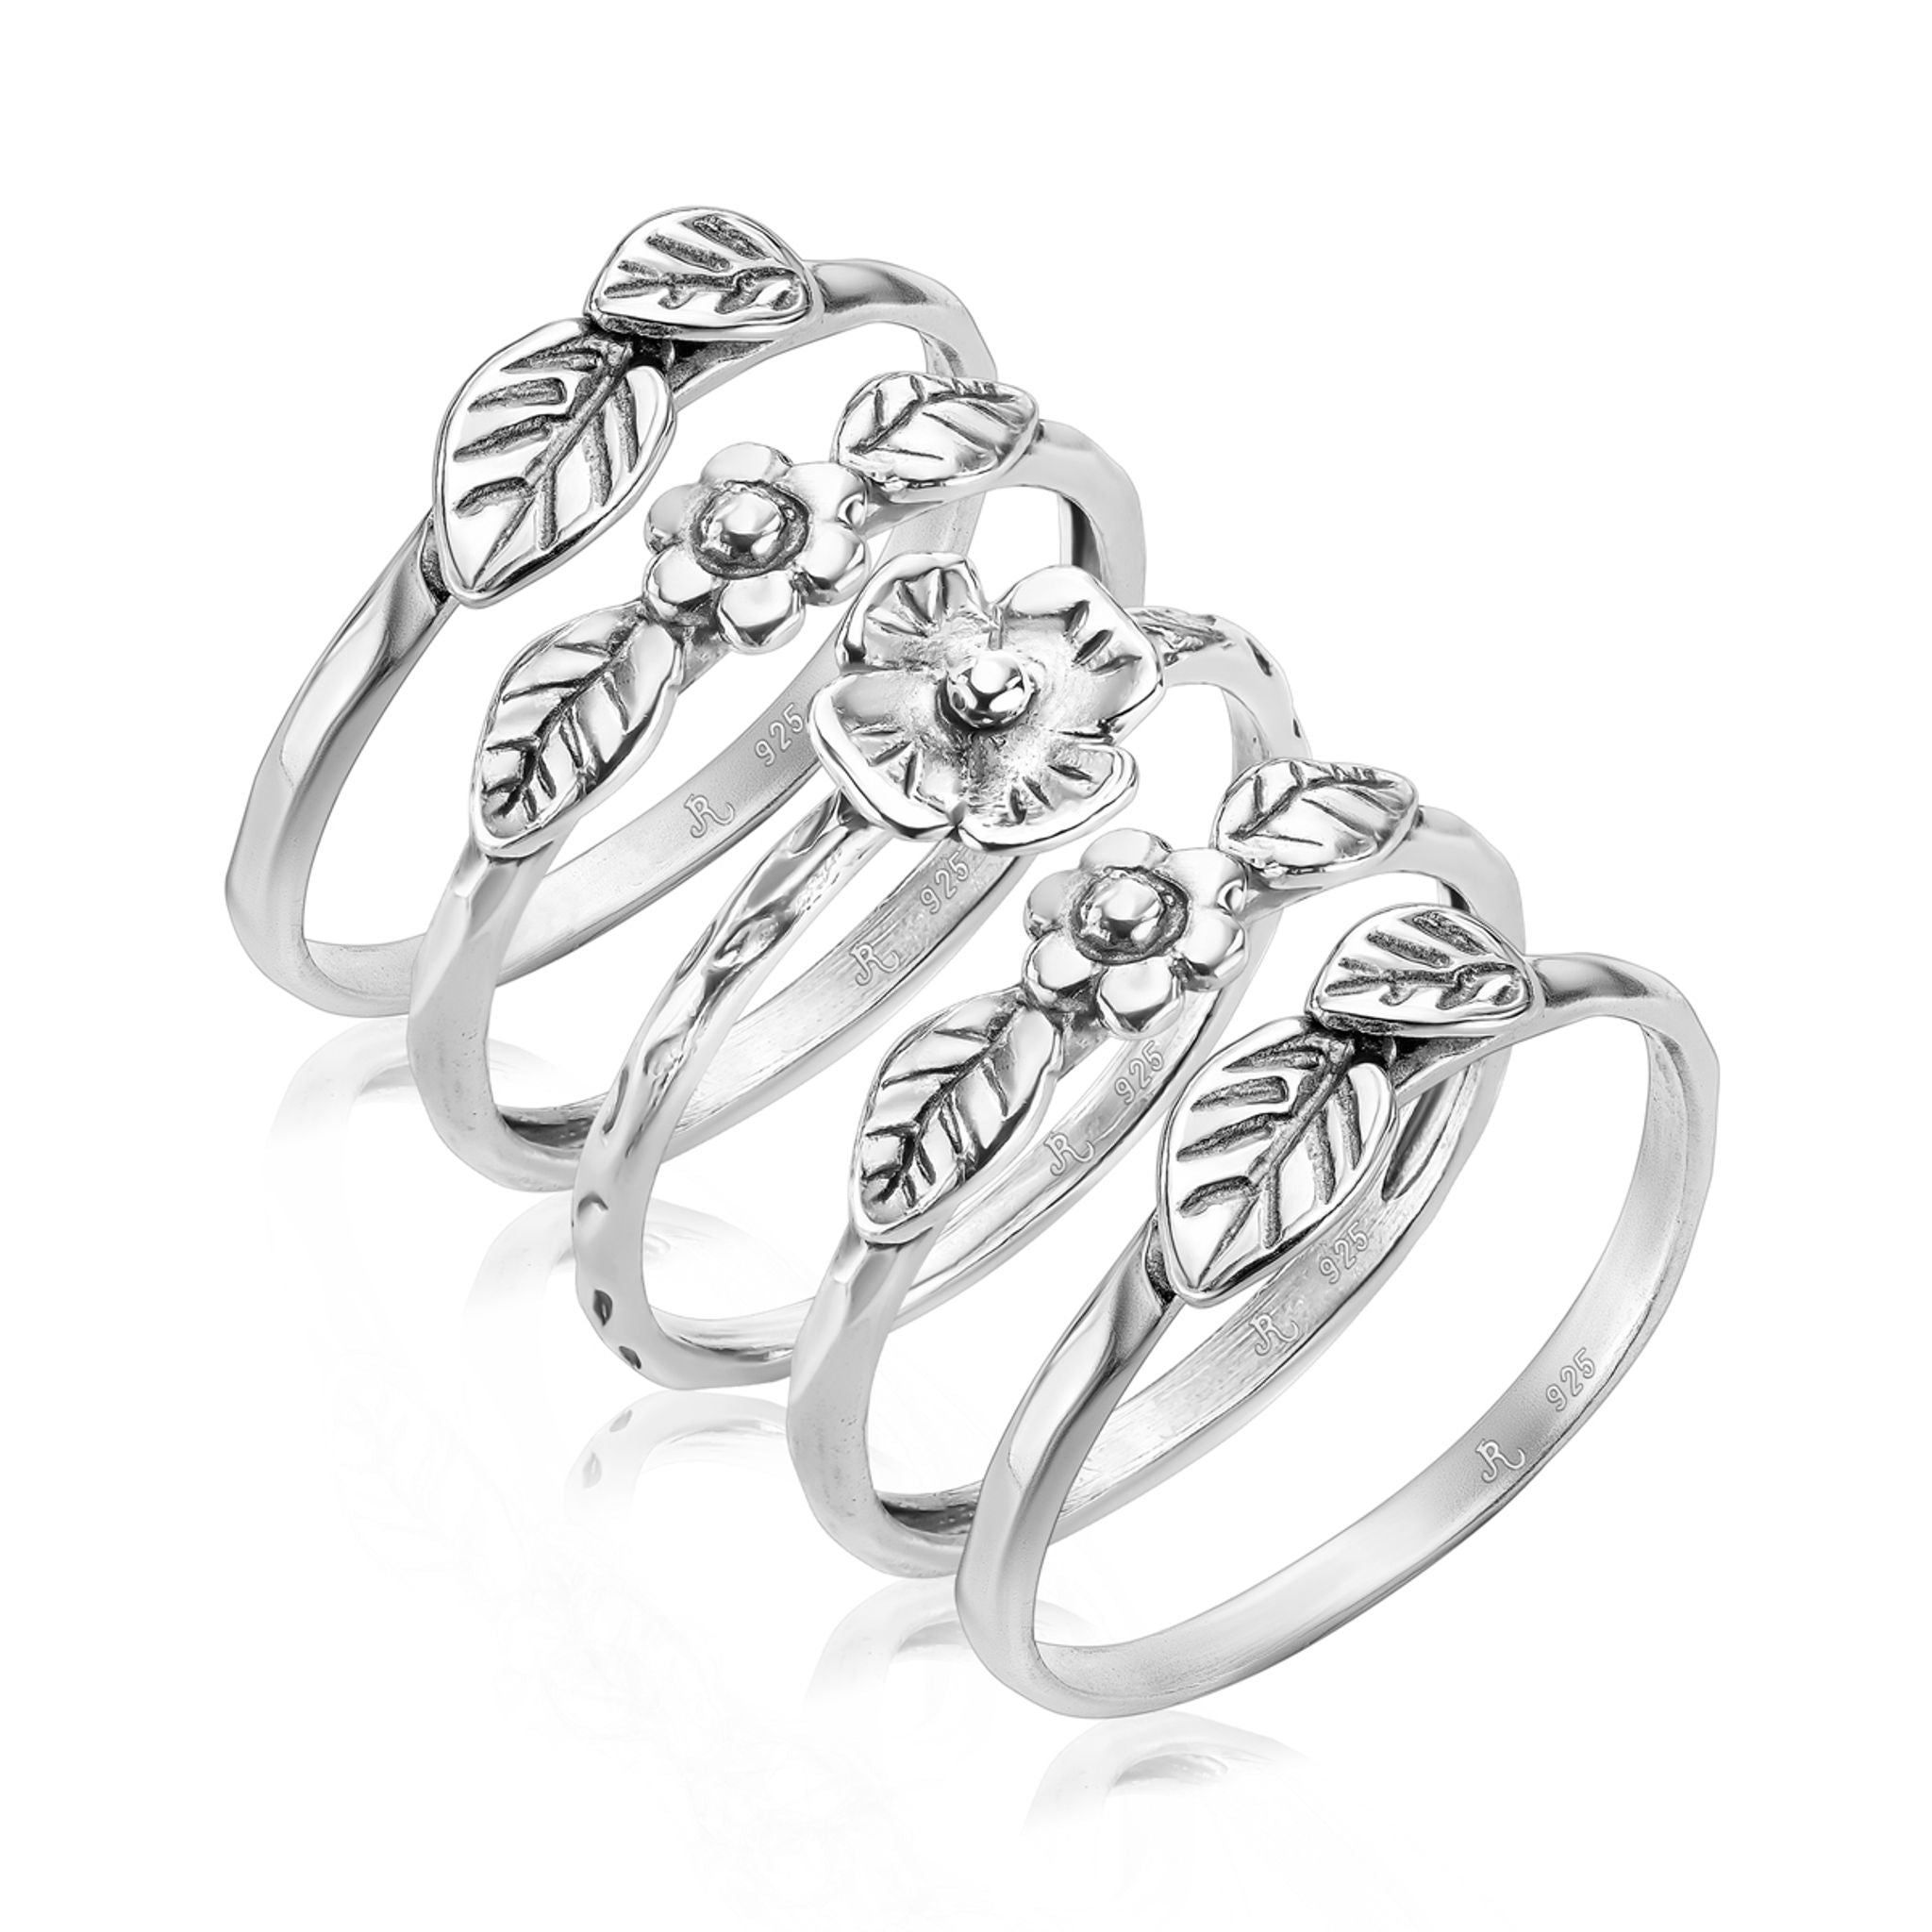 Set of 5 Sterling Silver Floral Stacking Rings